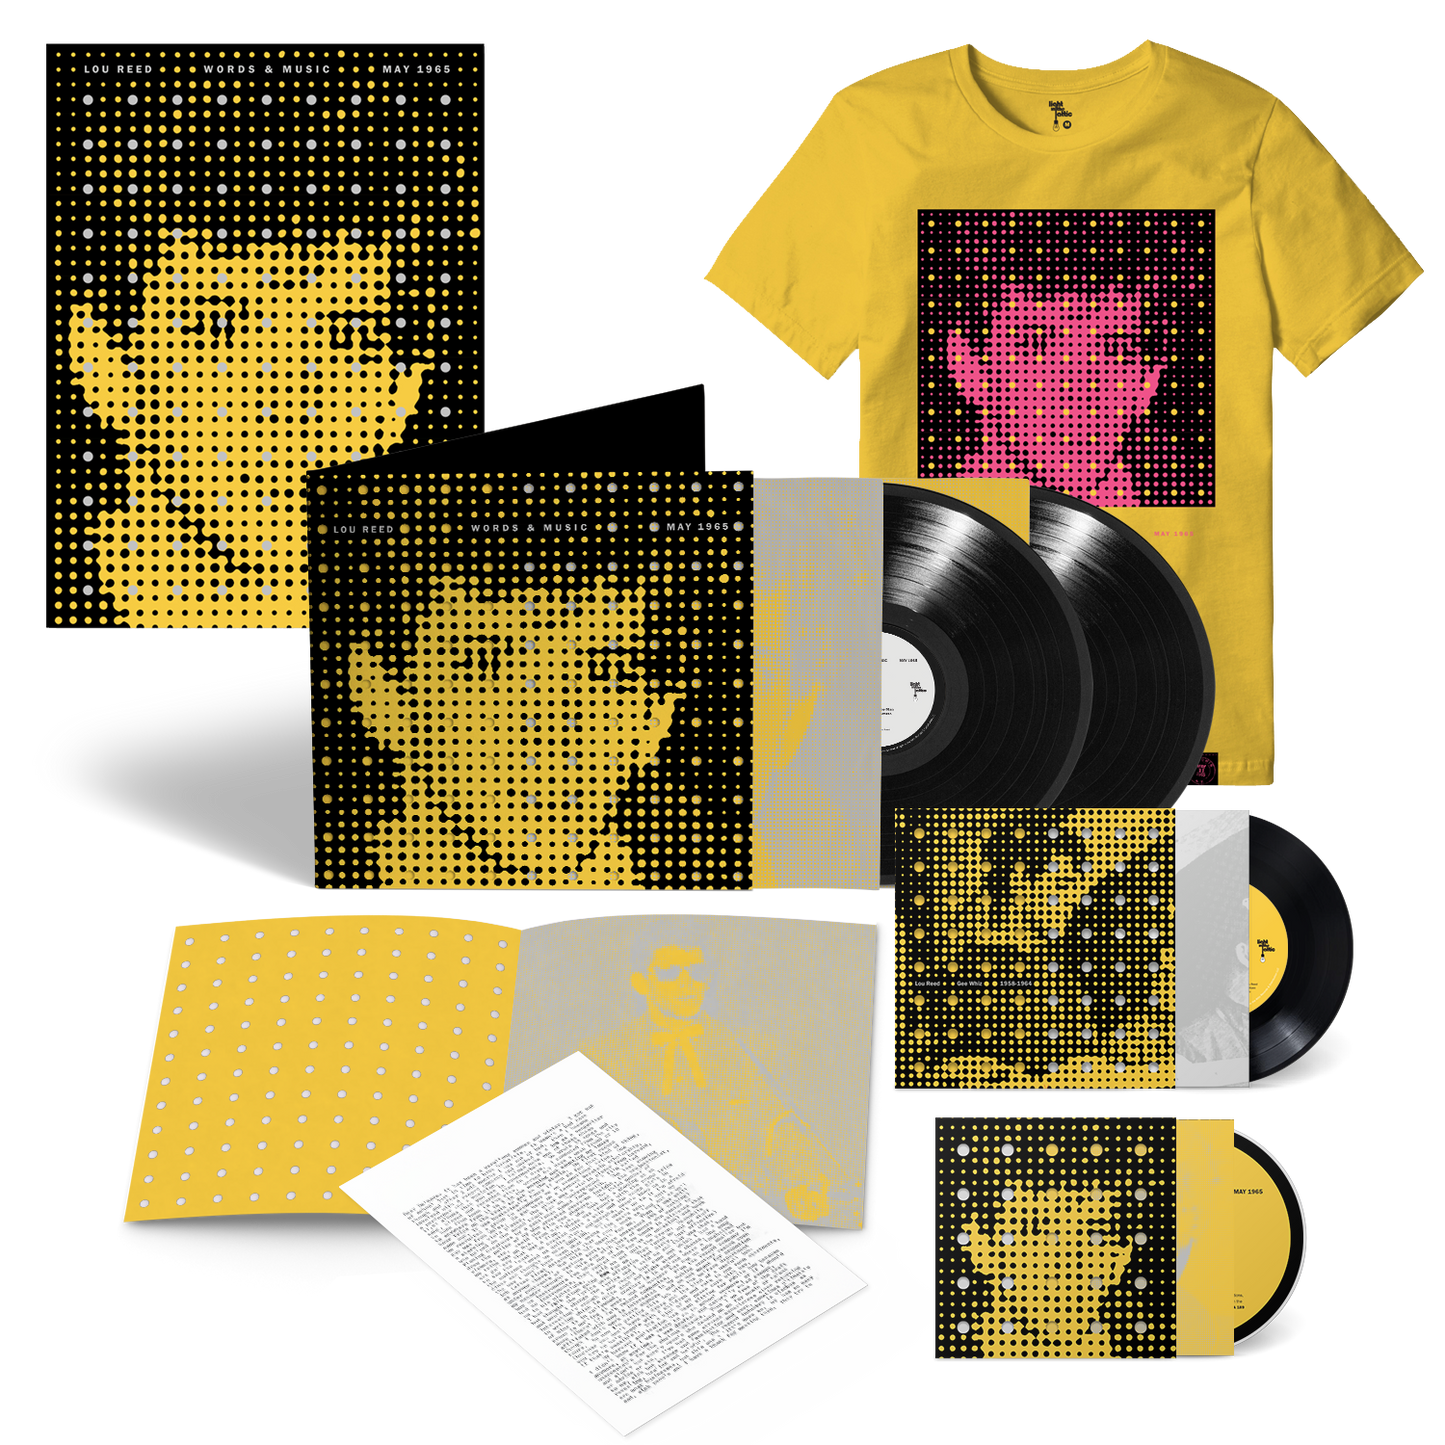 Words & Music, May 1965 - Deluxe Edition + T-Shirt + Lithograph Bundle